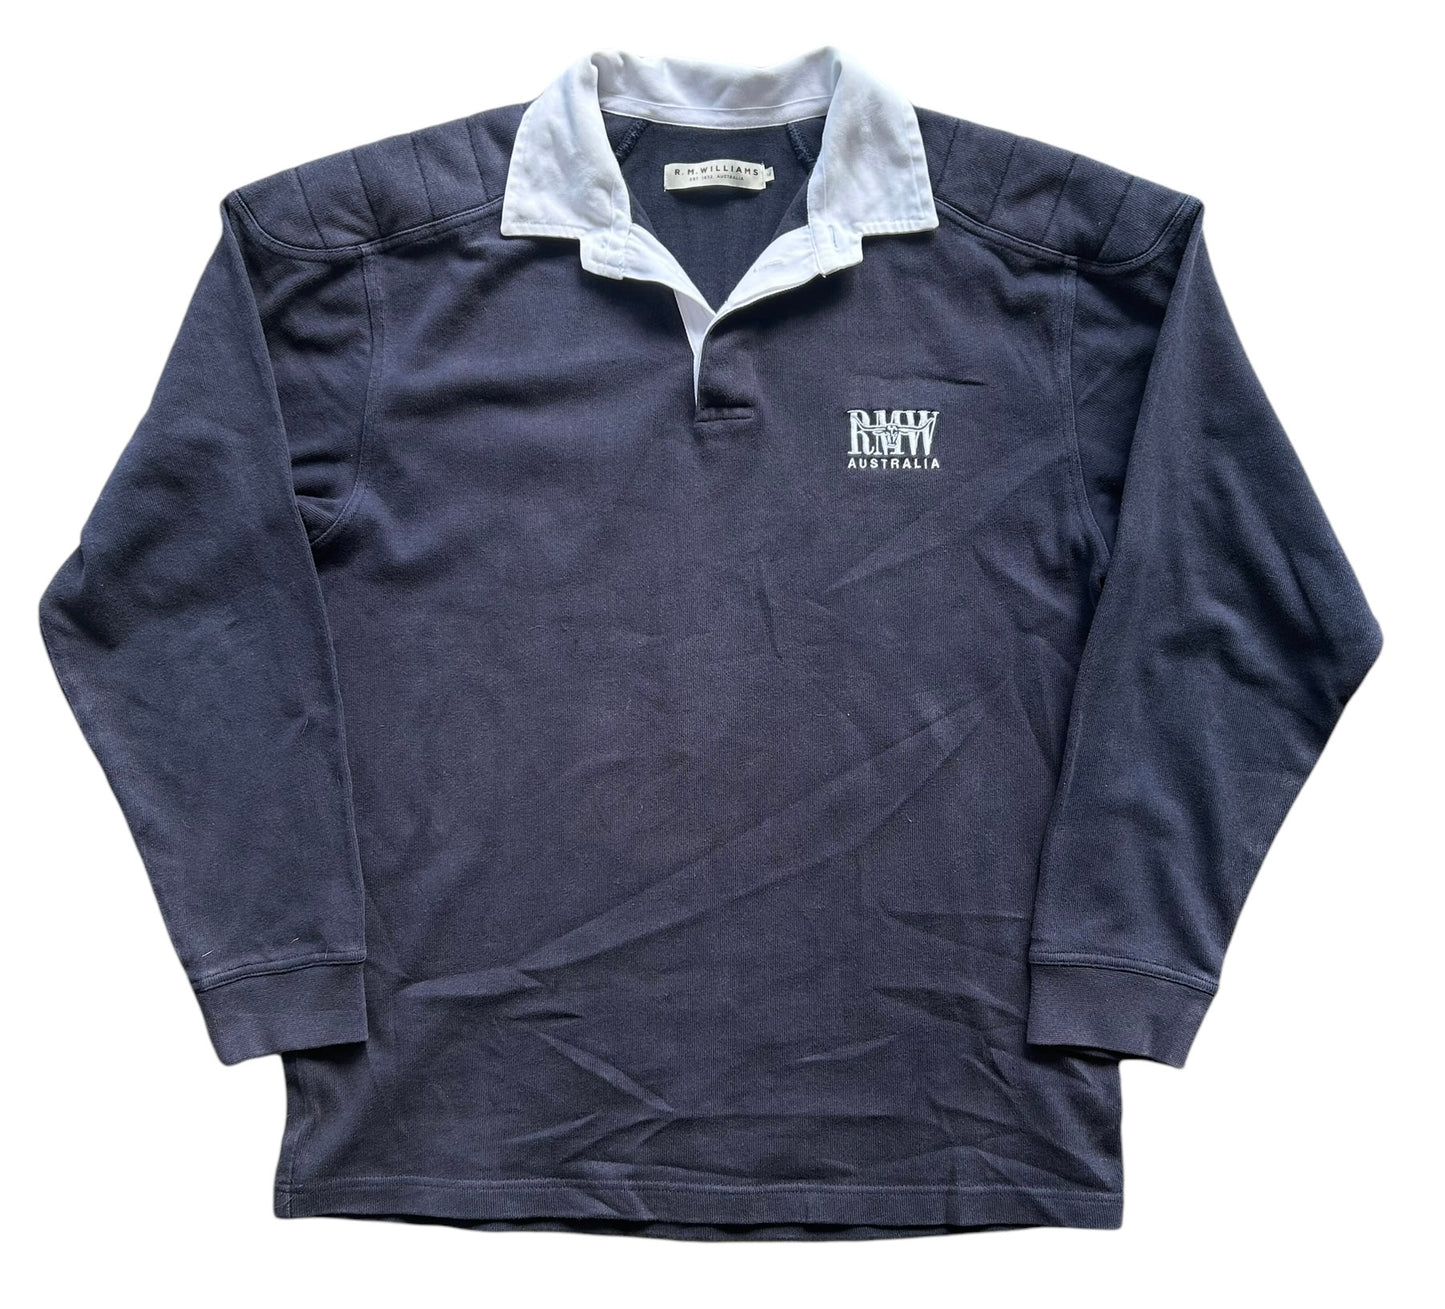 RM Williams Rugby Jumper